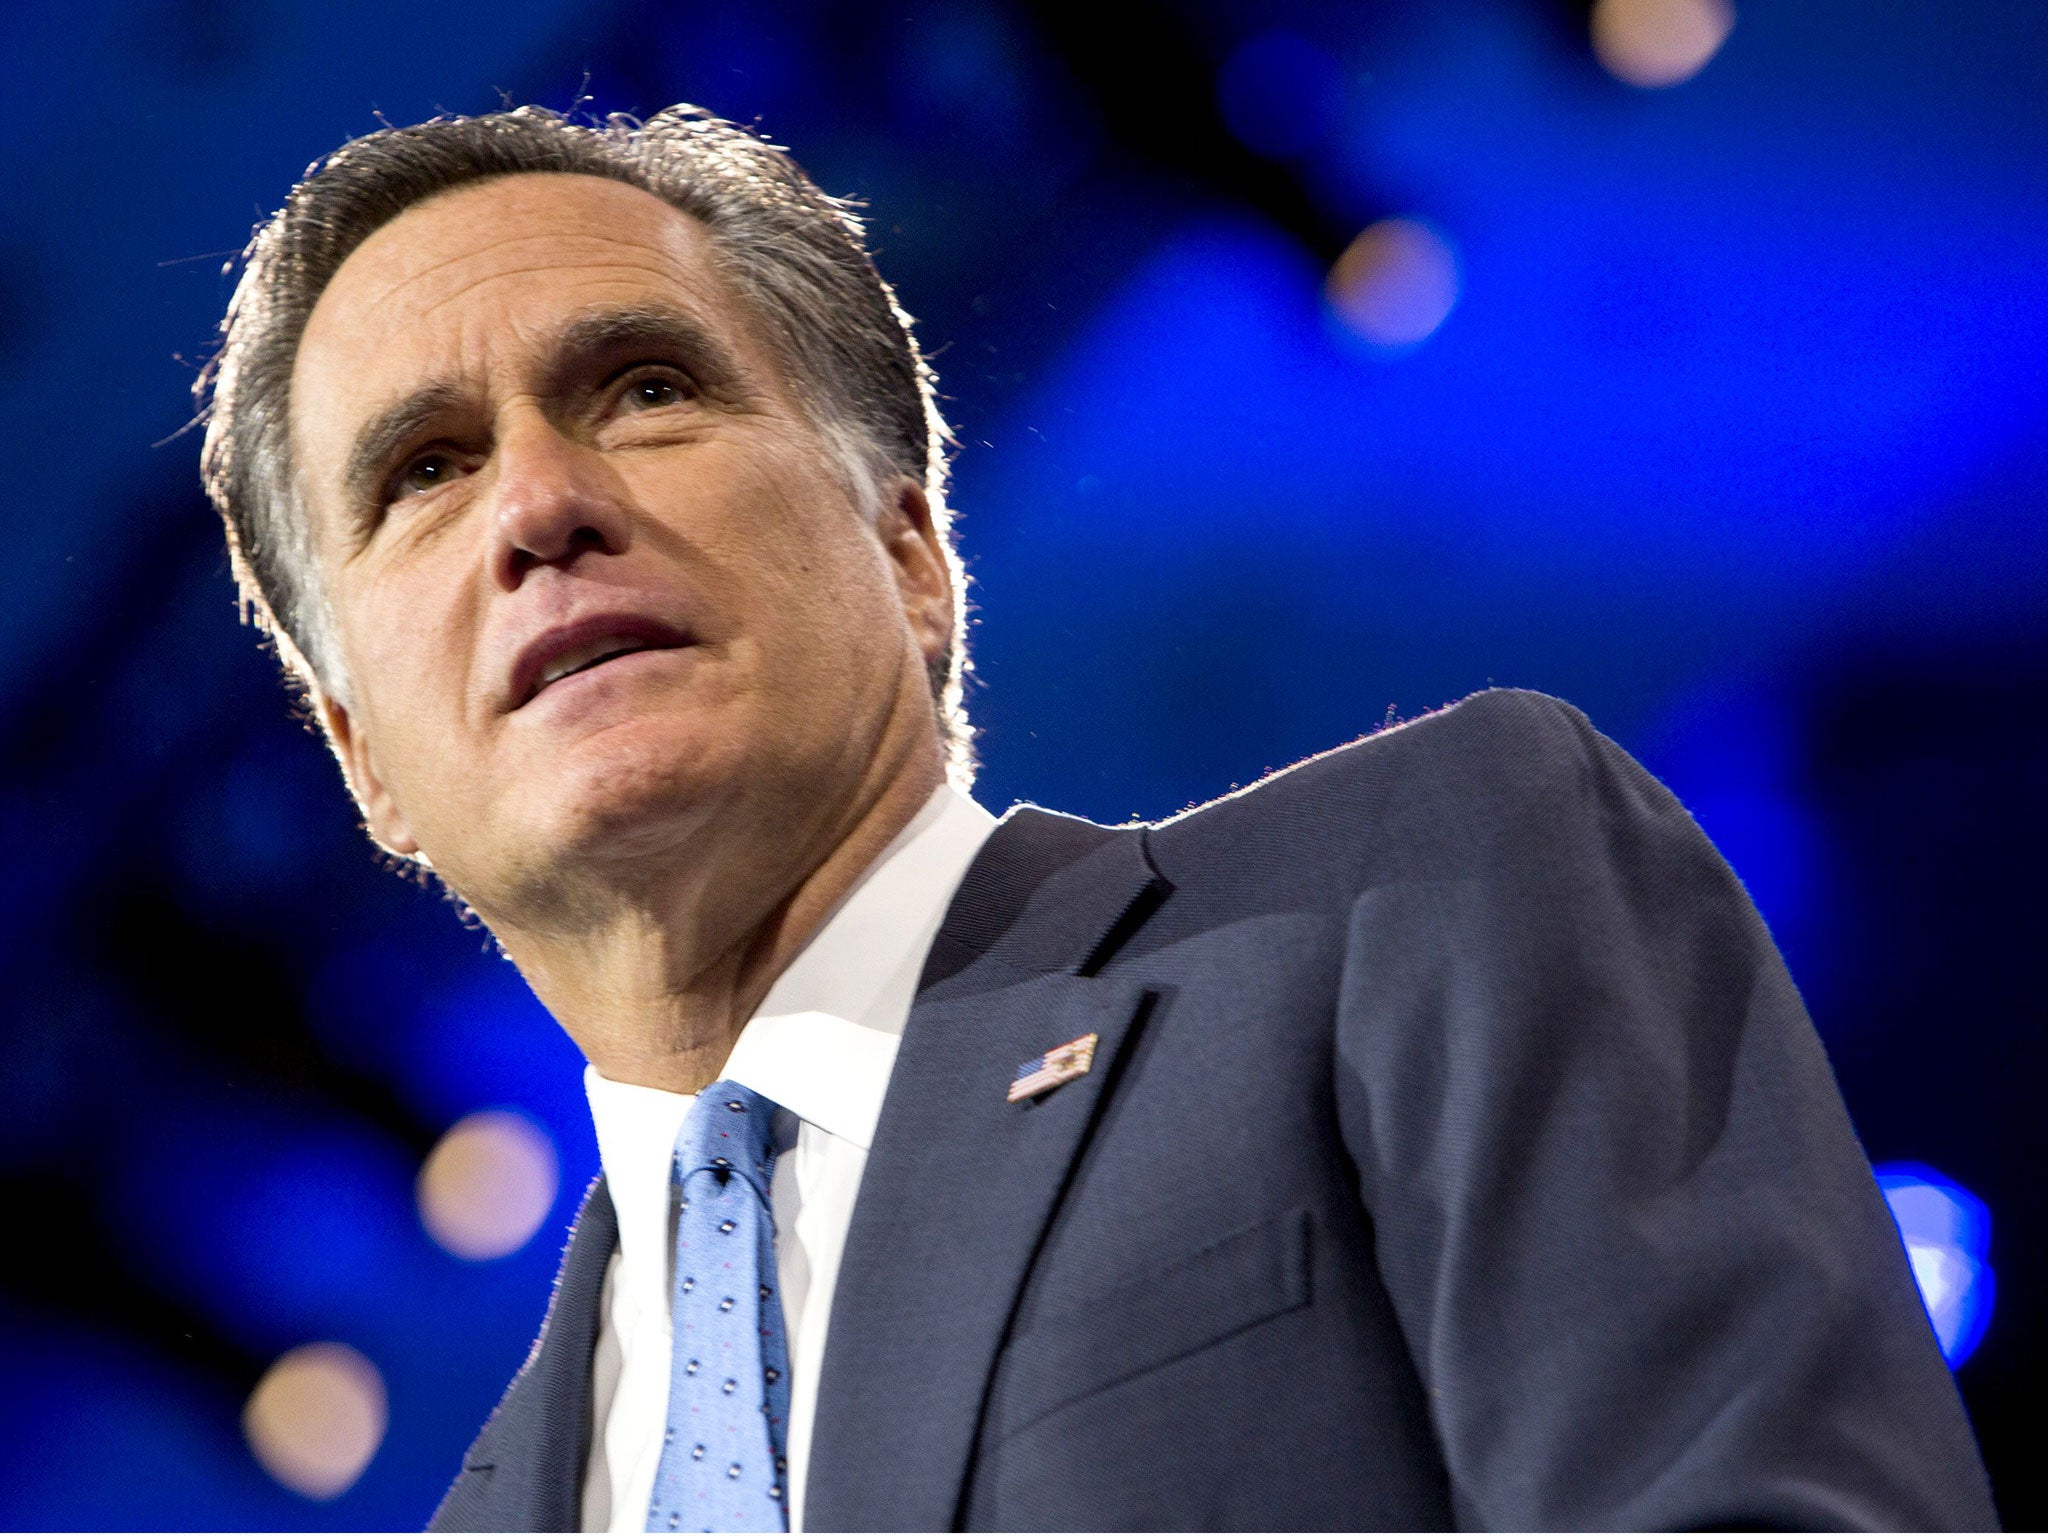 Mitt Romney was roundly ridiculed after he said he was handed 'binders full of women' during a 2012 presidential election debate